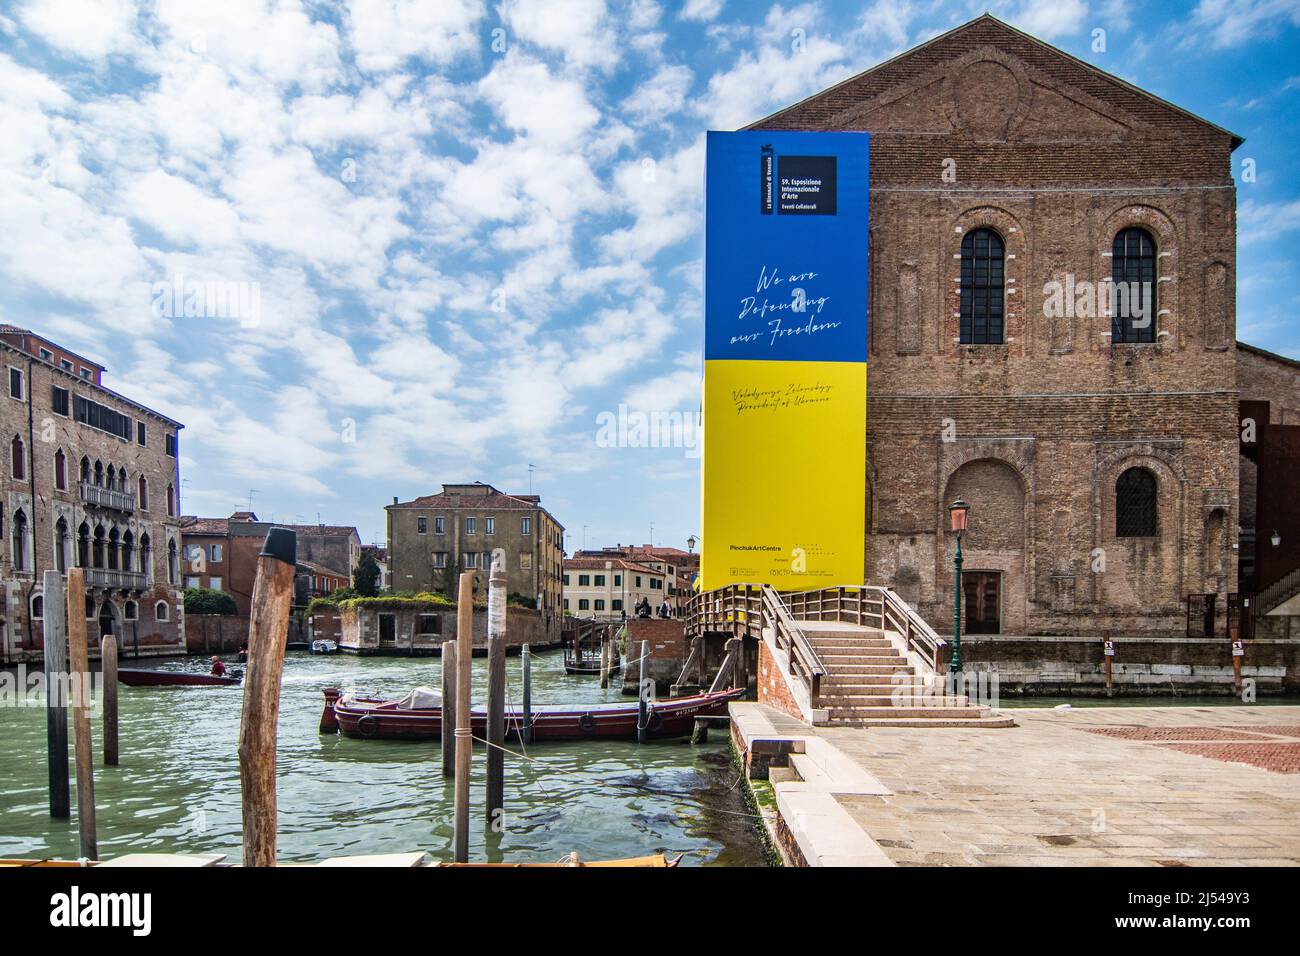 Venice, Italy. 20th April, 2021: The external of the Ukrainian Pavilon with a message of the President Zelensky regarding the actual conflict with Russia, is seen on the Misericordia Palace on April 19, 2022 in Venice, Italy. The 59th International Art Exhibition in Venice will open to the public from April 23th to November 27th. © Simone Padovani / Alamy Live News Stock Photo